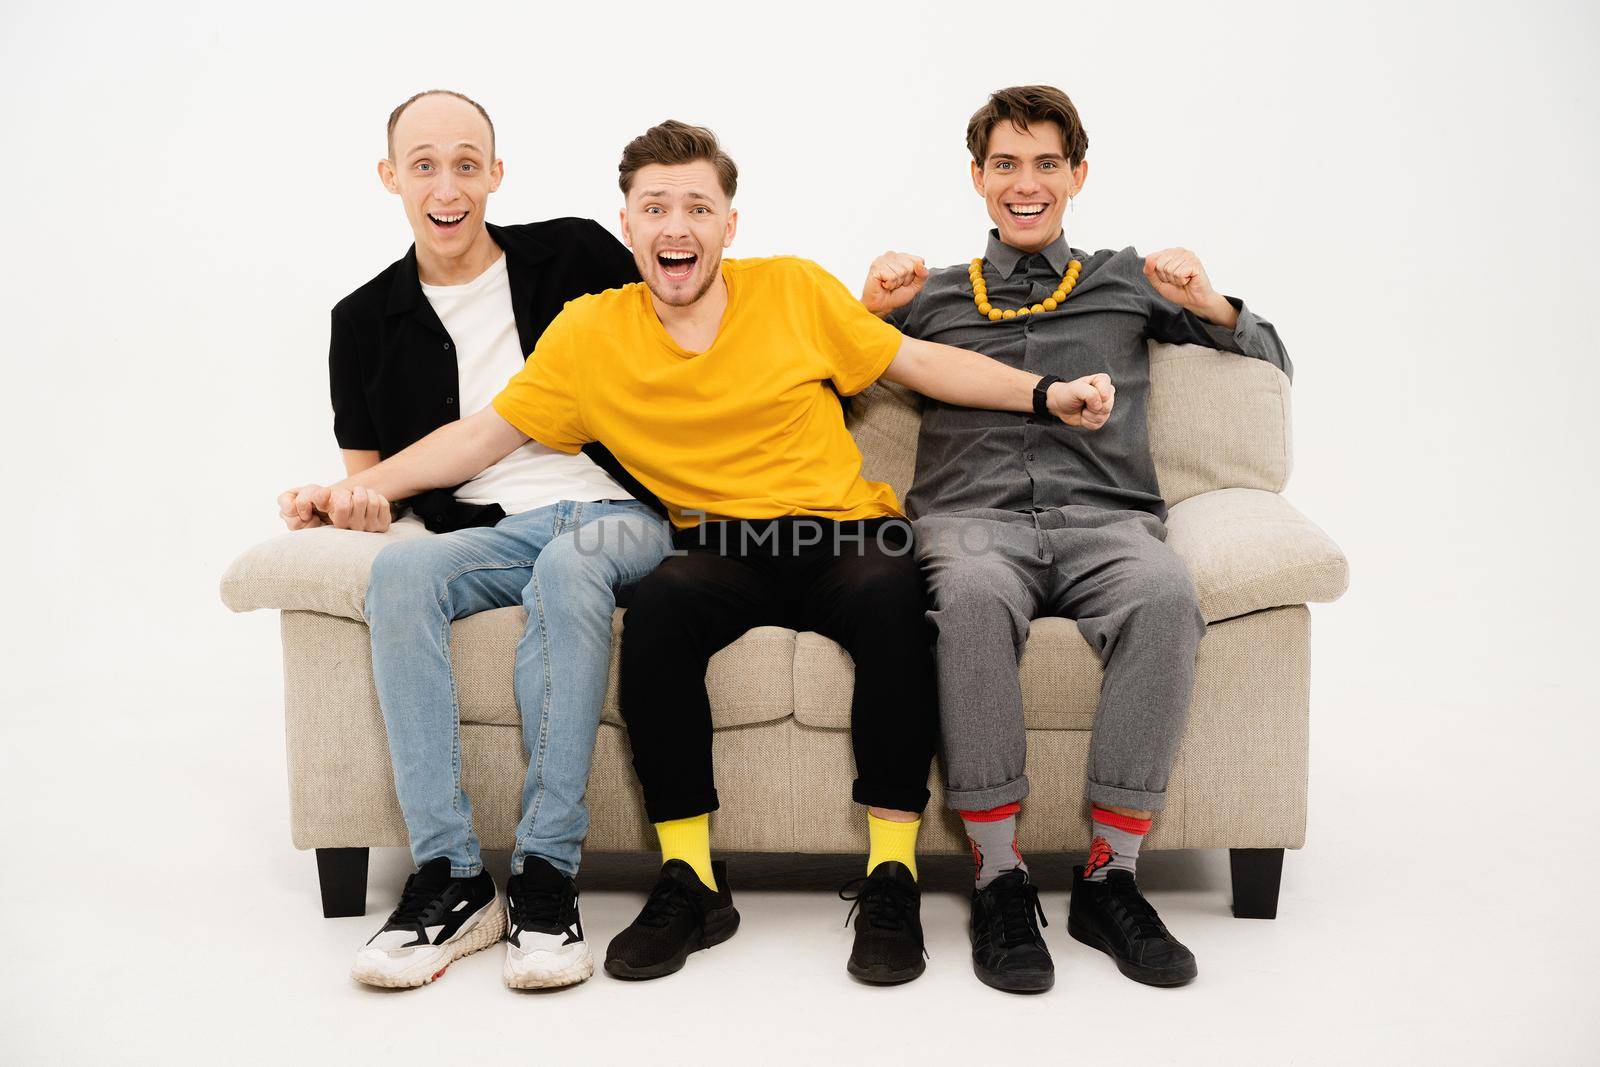 Watching a championship game on tv tree friends sitting on a white sofa isolated on white background. Guy reacts to winning or a lose. Sports tv concept.